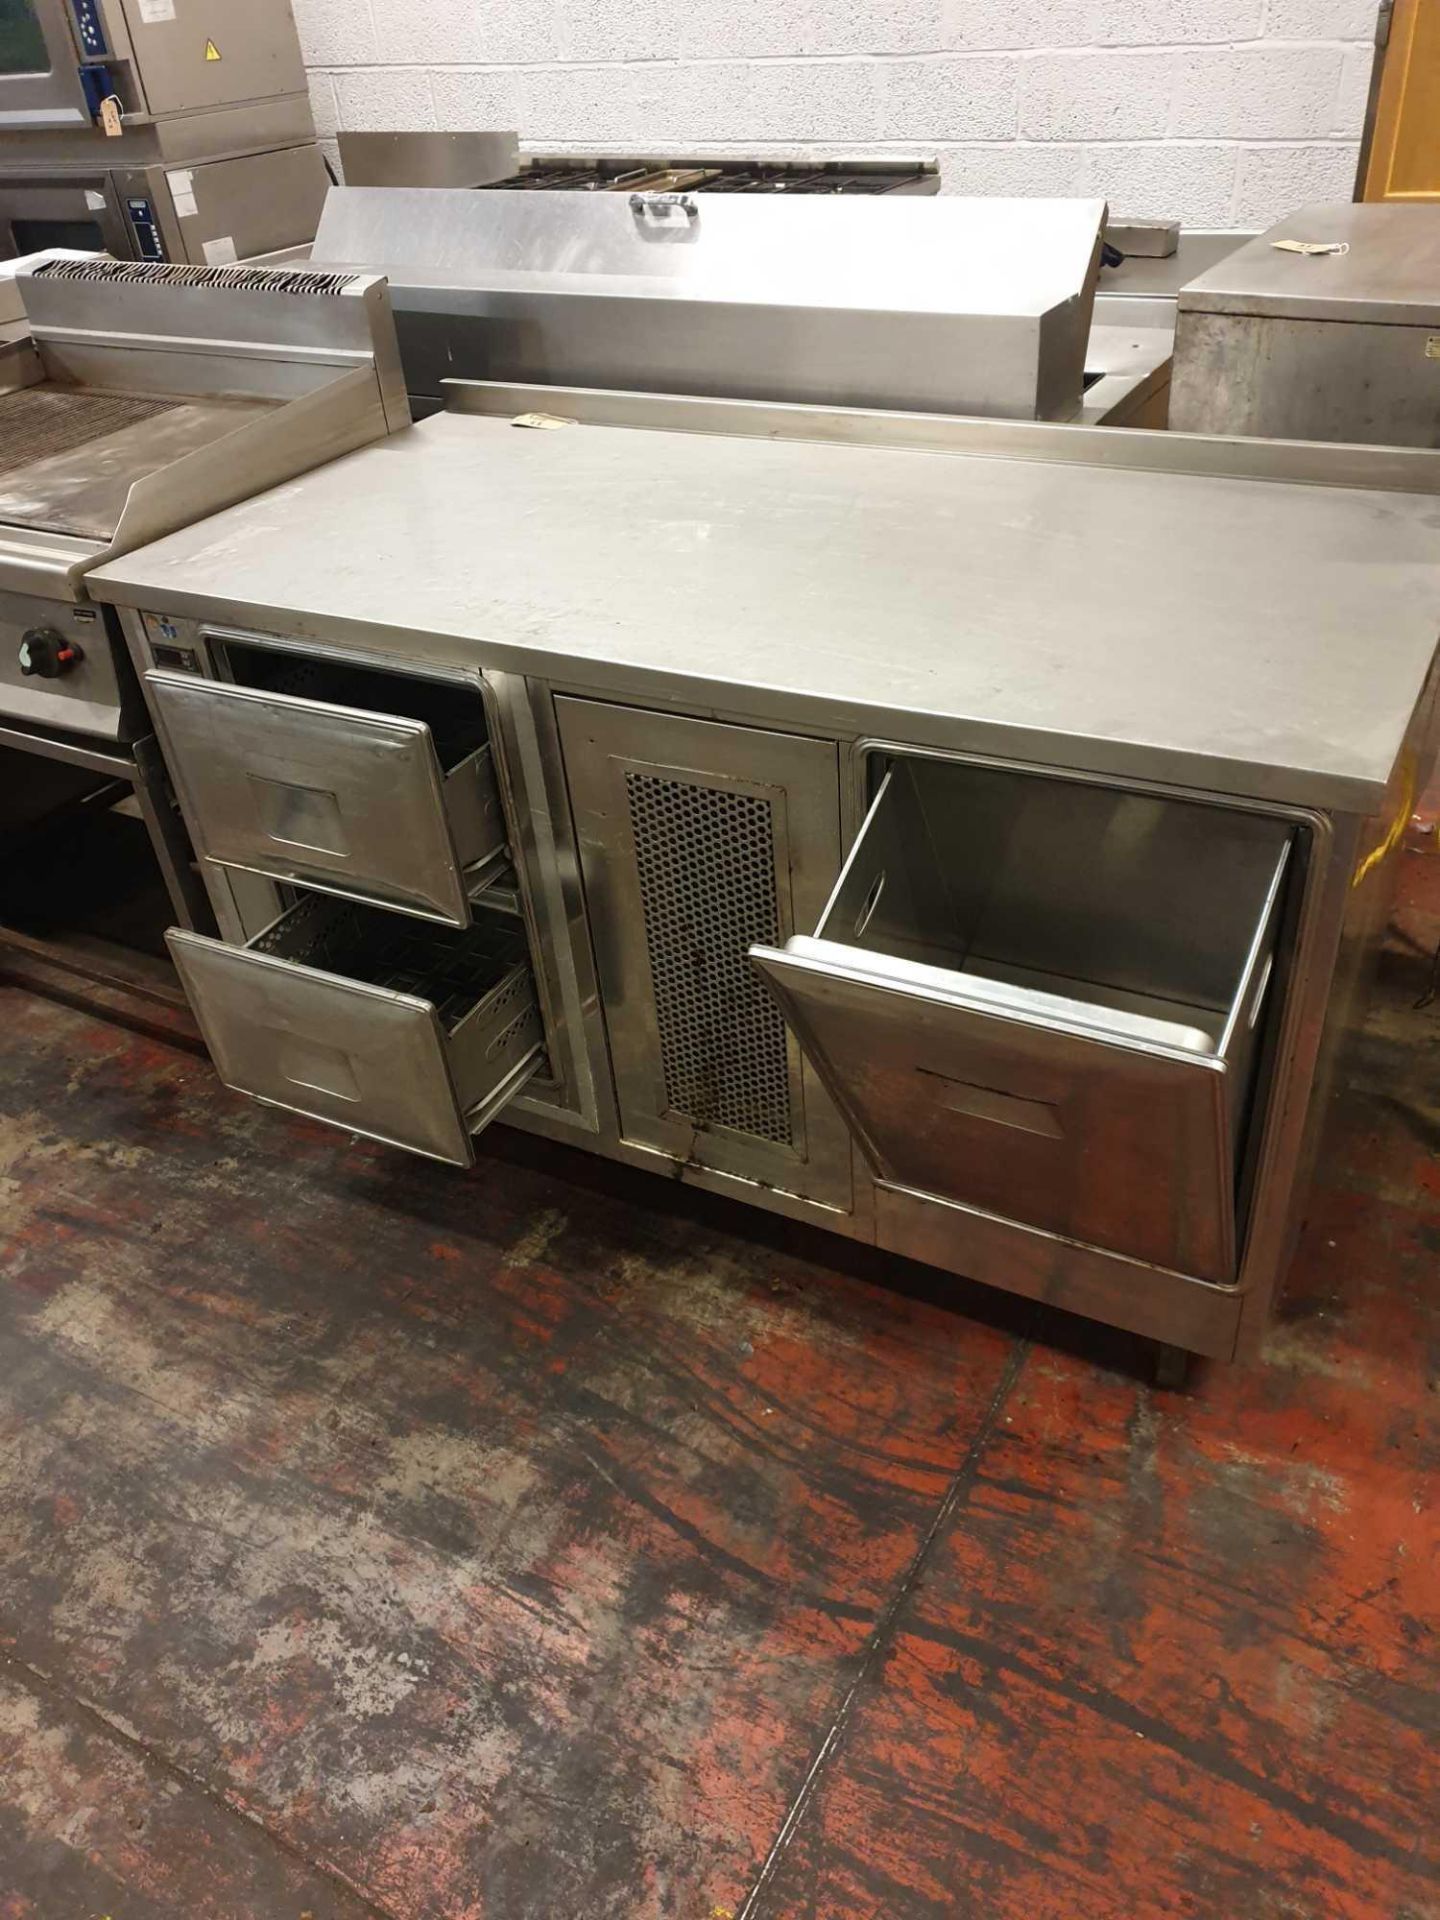 Stainless Steel 3 Drawer Bench Chiller 160cm X 80 x 92cm - Image 2 of 2